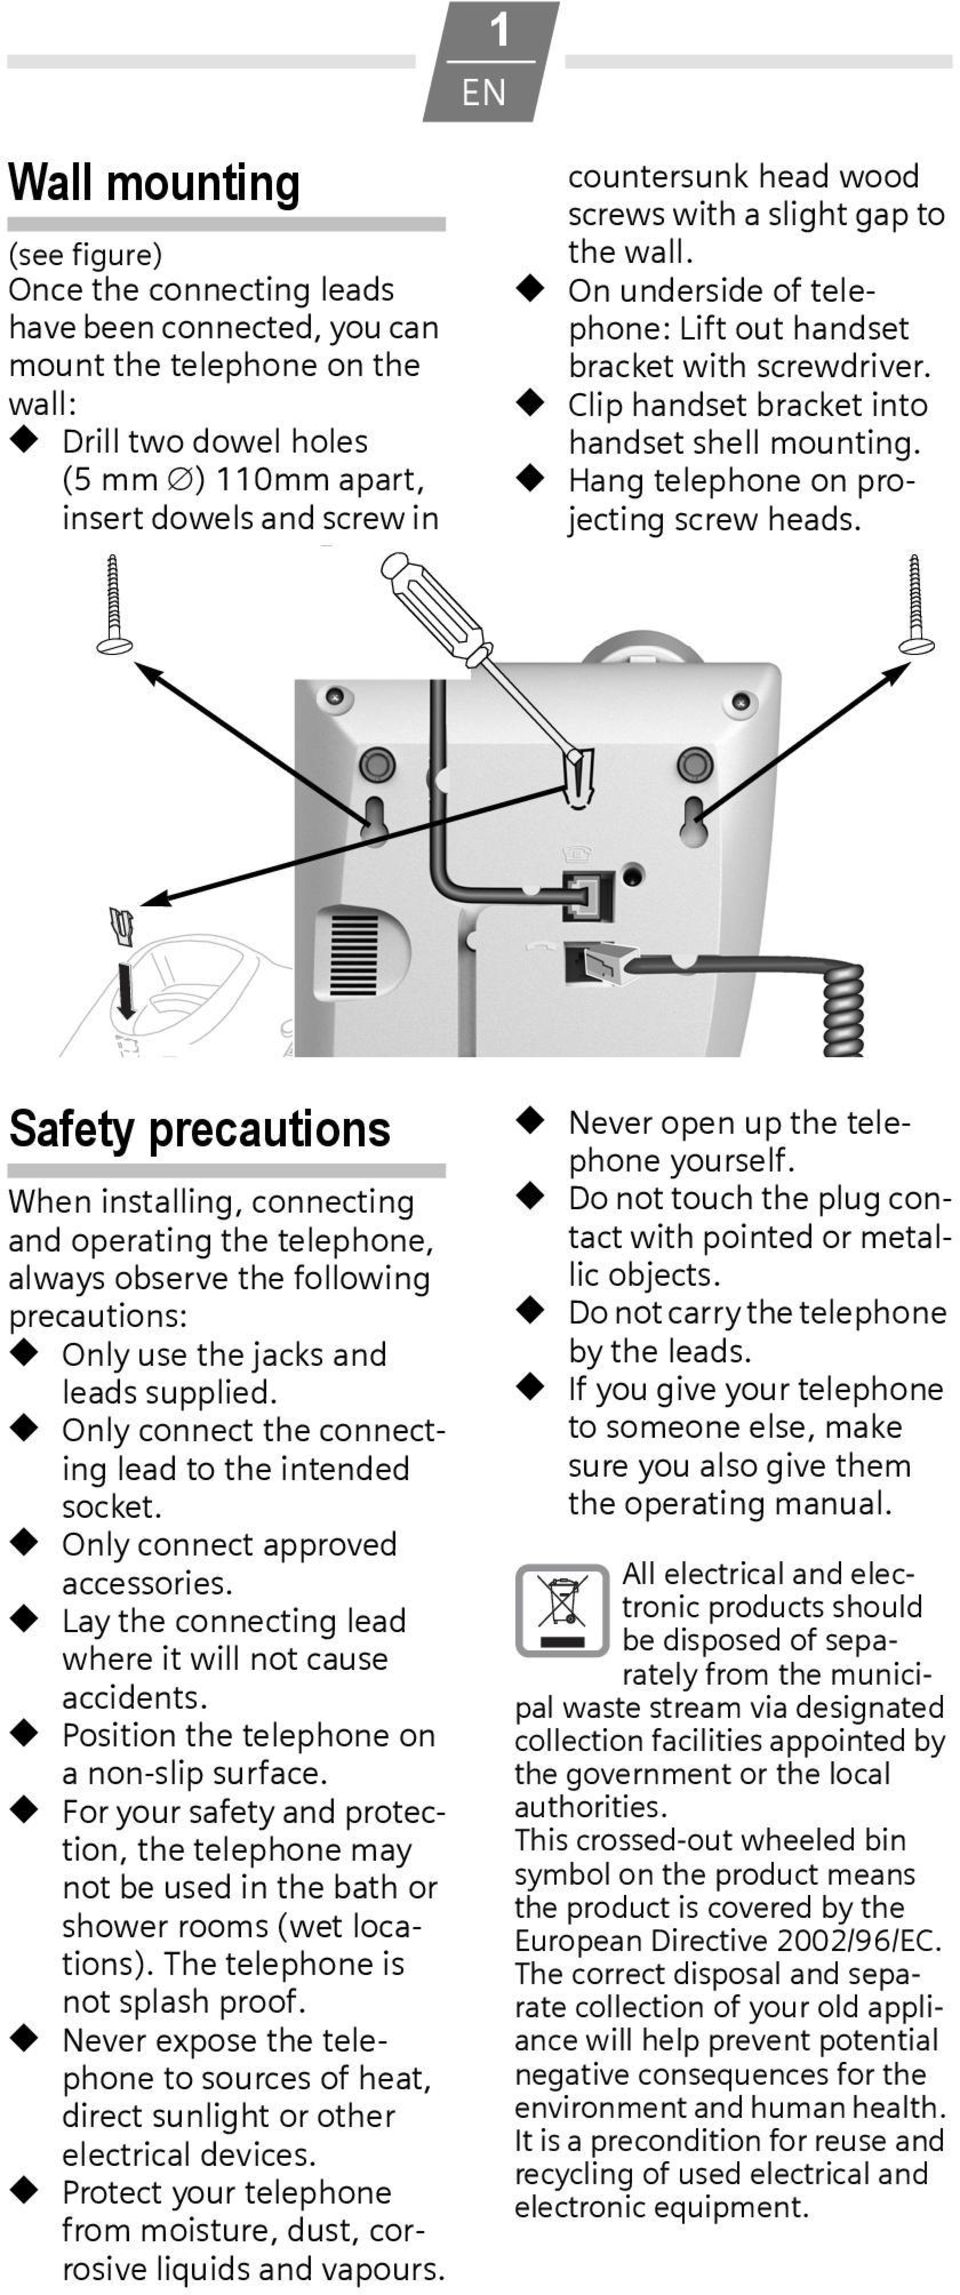 Hang telephone on projecting screw heads. Safety precautions When installing, connecting and operating the telephone, always observe the following precautions: Only use the jacks and leads supplied.